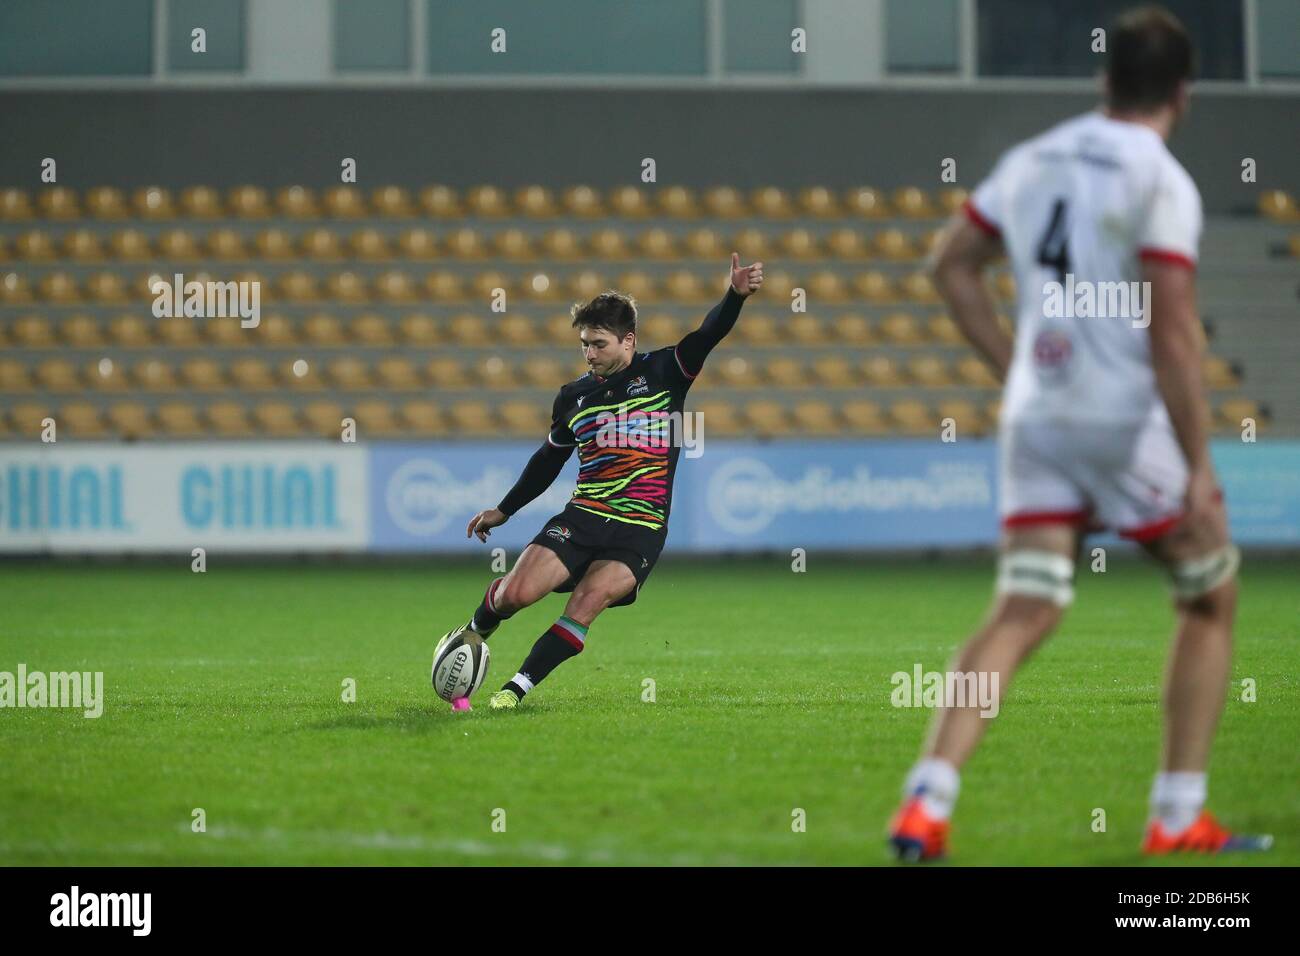 Sergio Lanfranchi stadium, Parma, Italy, 16 Nov 2020, Antonio Rizzi (Zebre)  during Zebre Rugby vs Ulster Rugby, Rugby Guinness Pro 14 match - Photo Massimiliano Carnabuci / LM Stock Photo